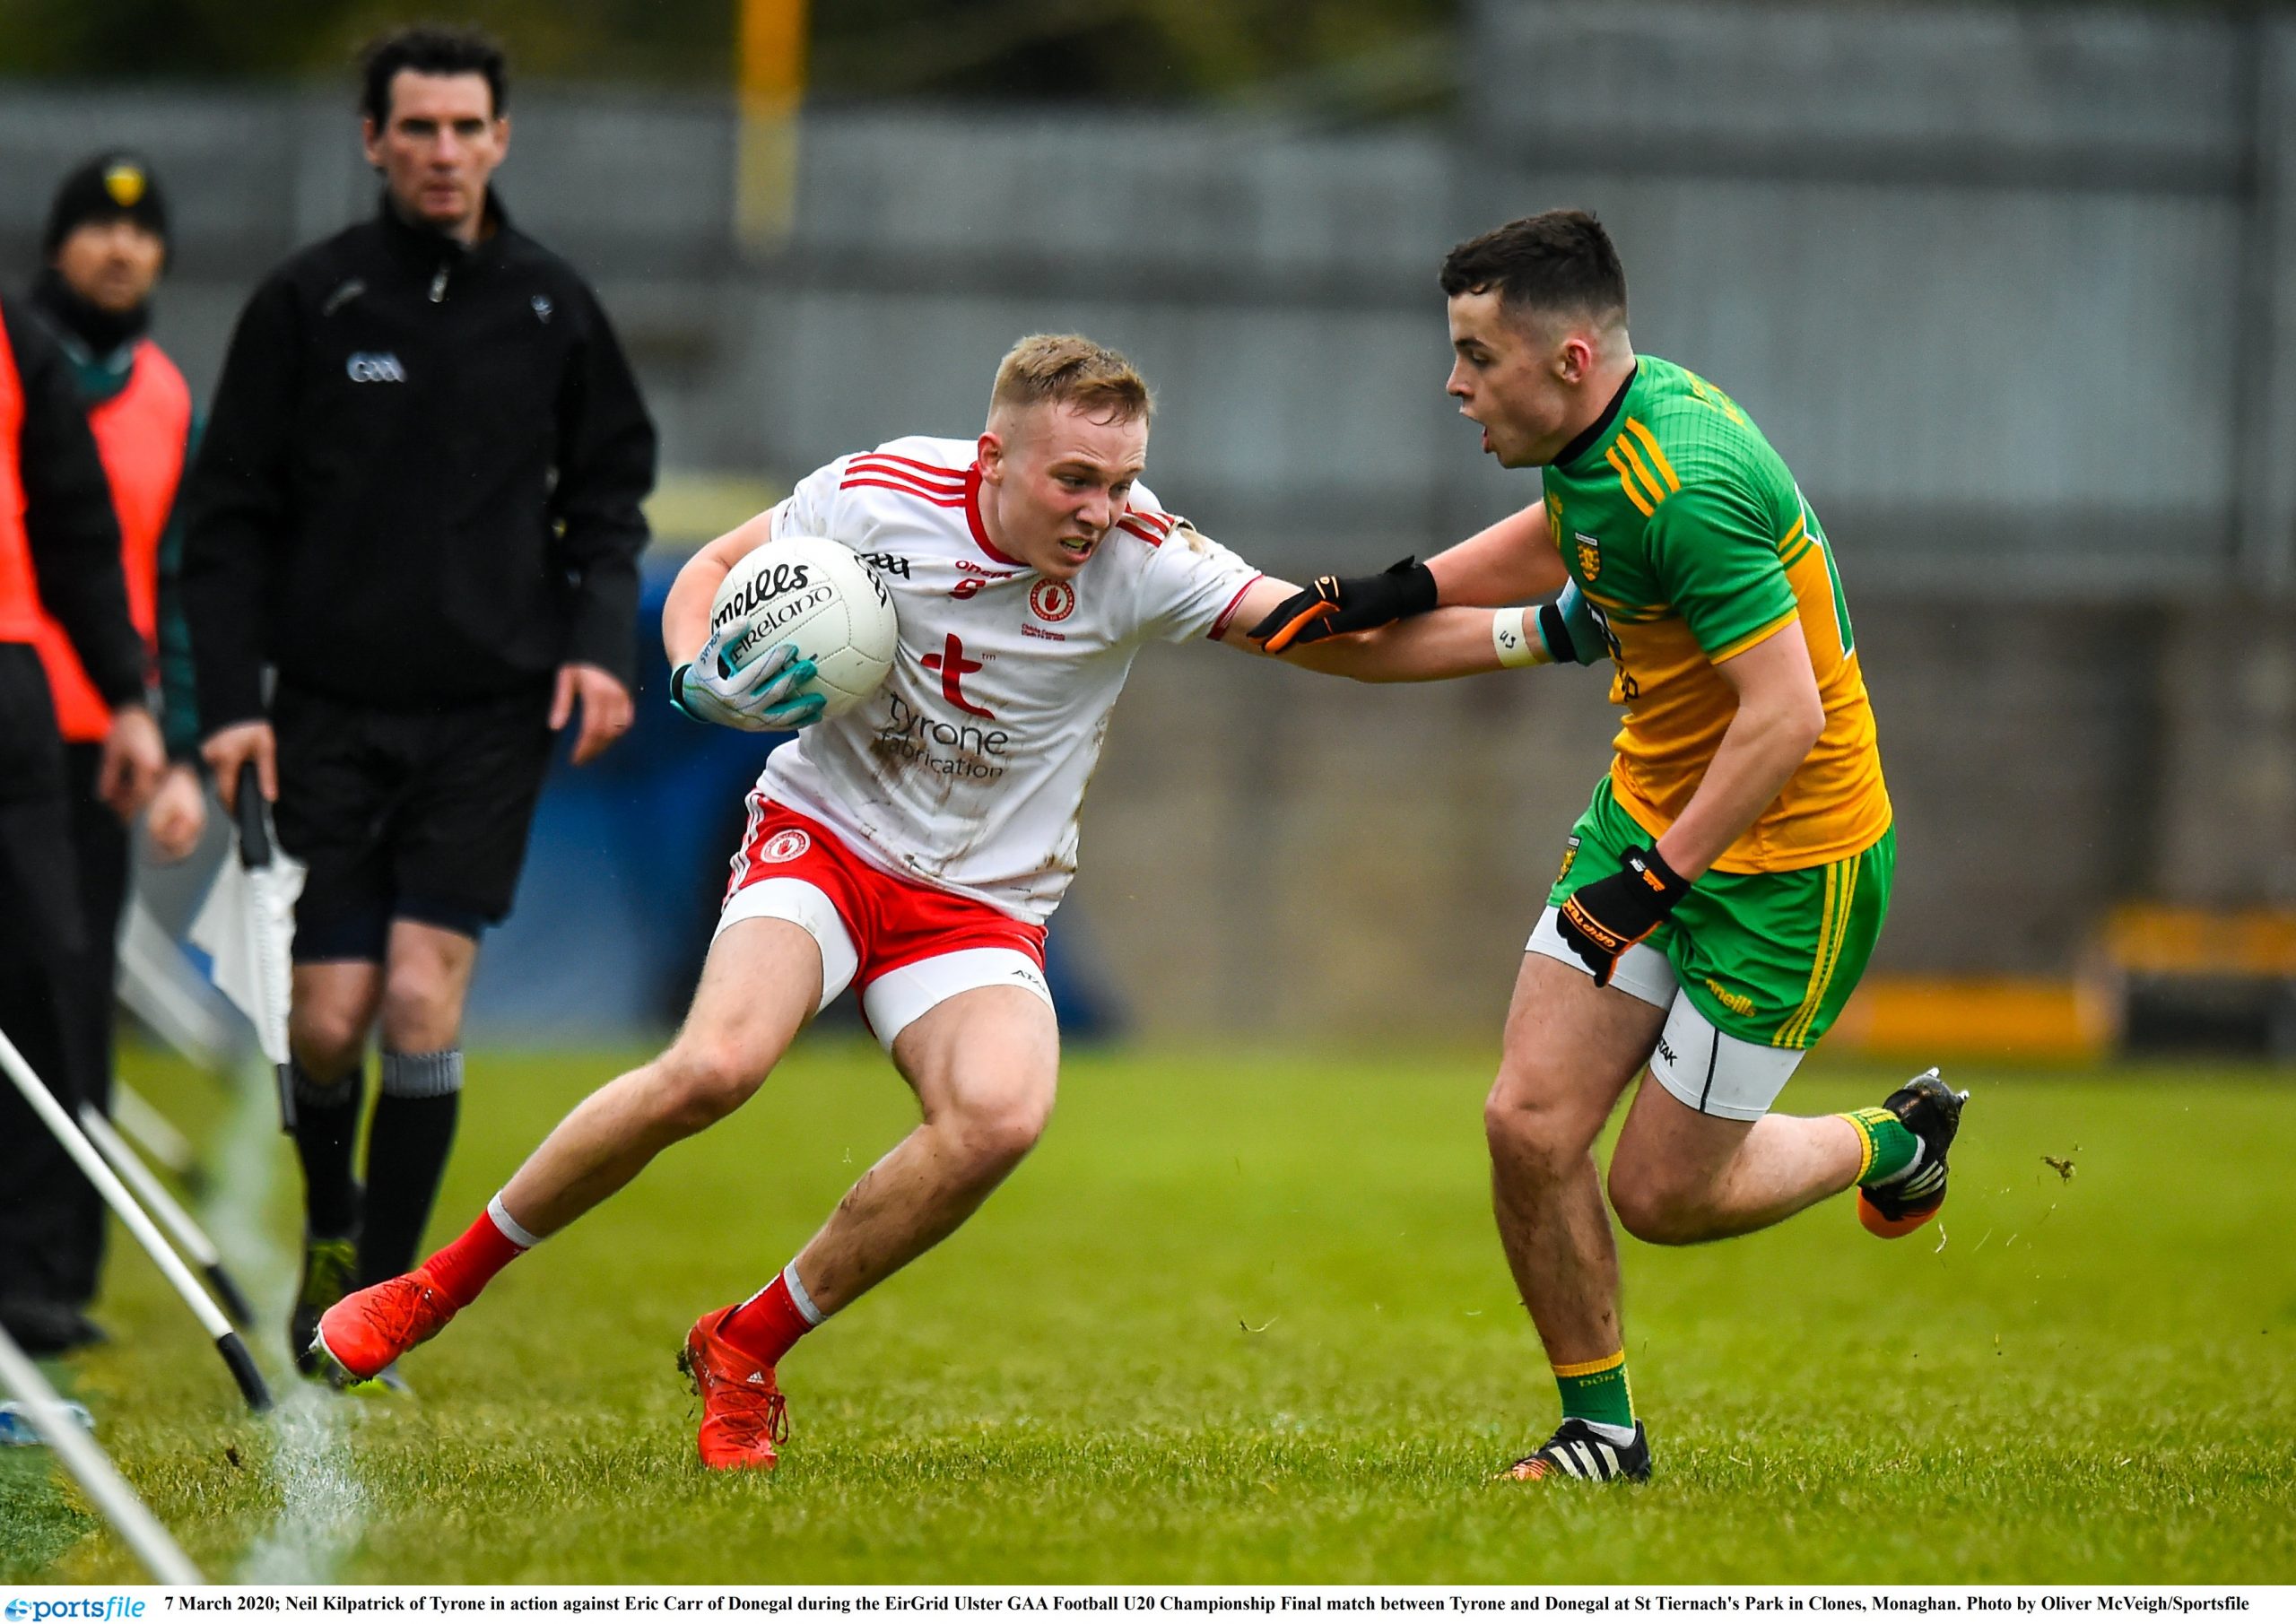 Tyrone star Kilpatrick follows in a proud family tradition